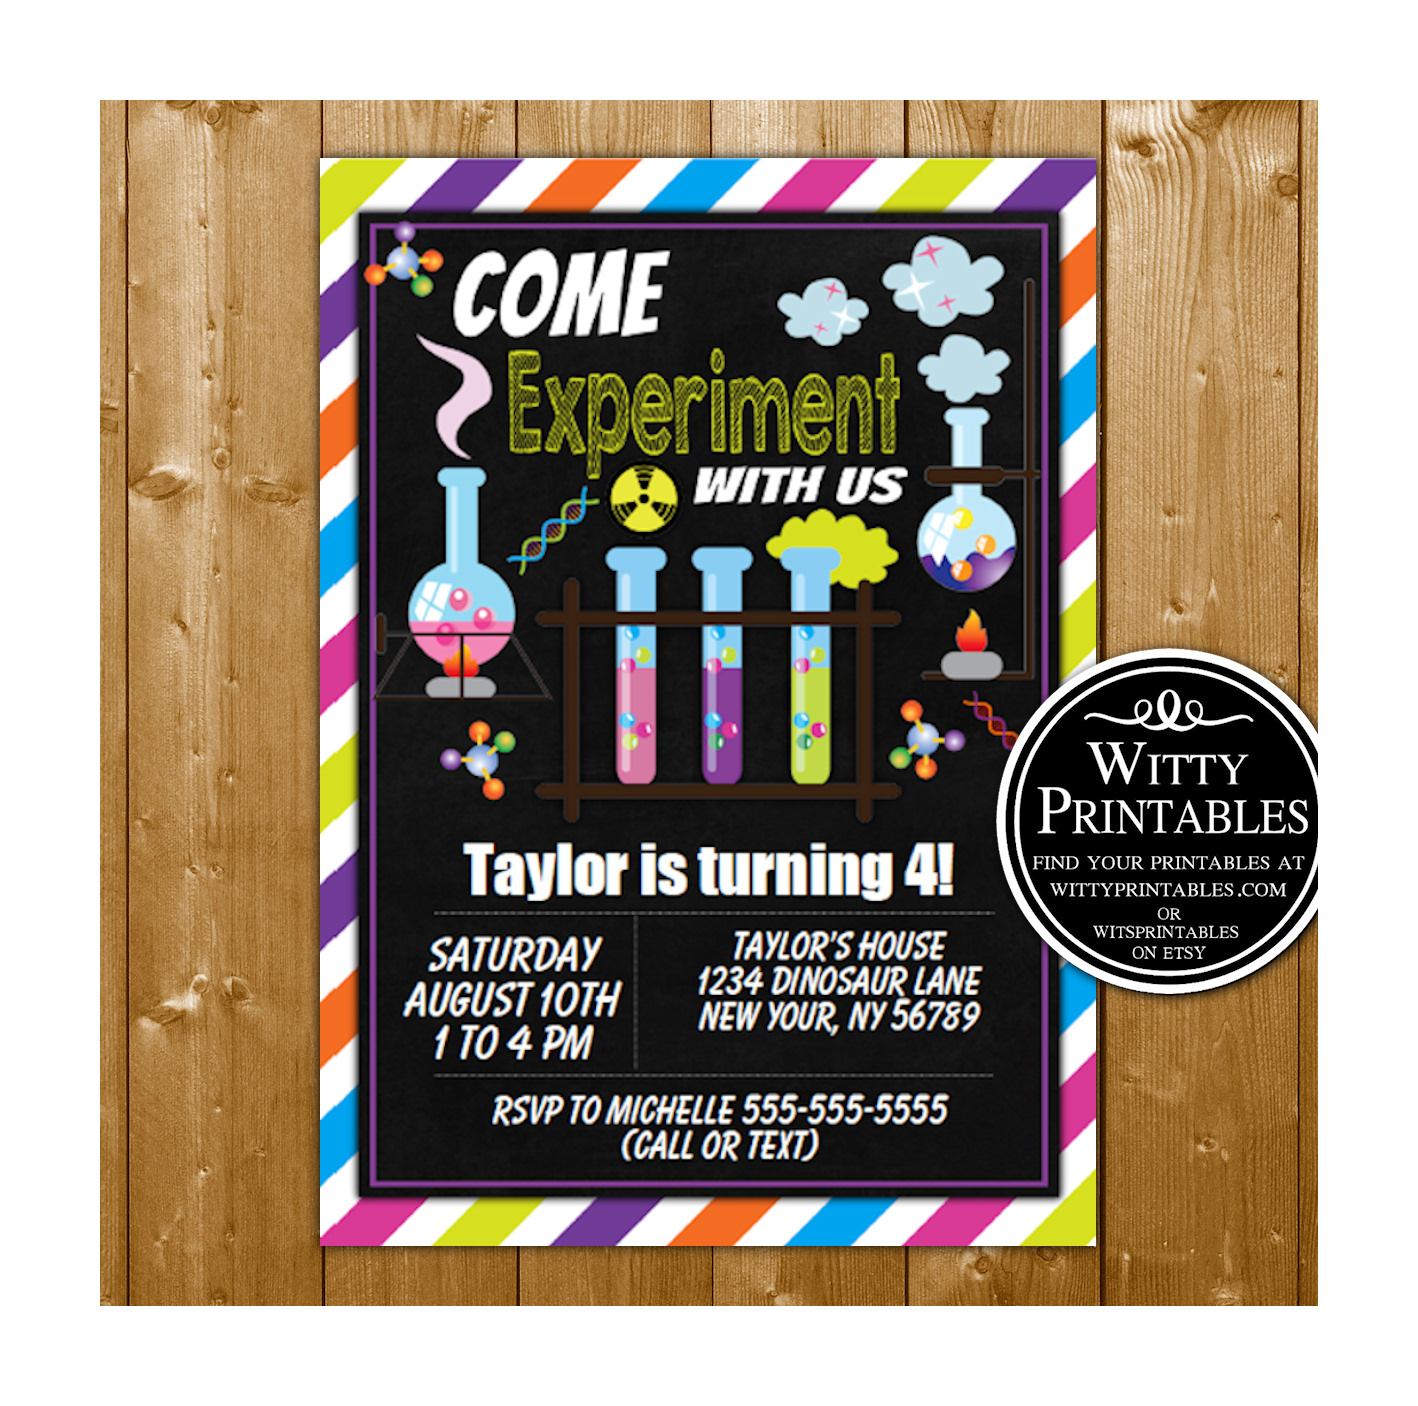 25 Of the Best Ideas for Science Birthday Party Invitations – Home